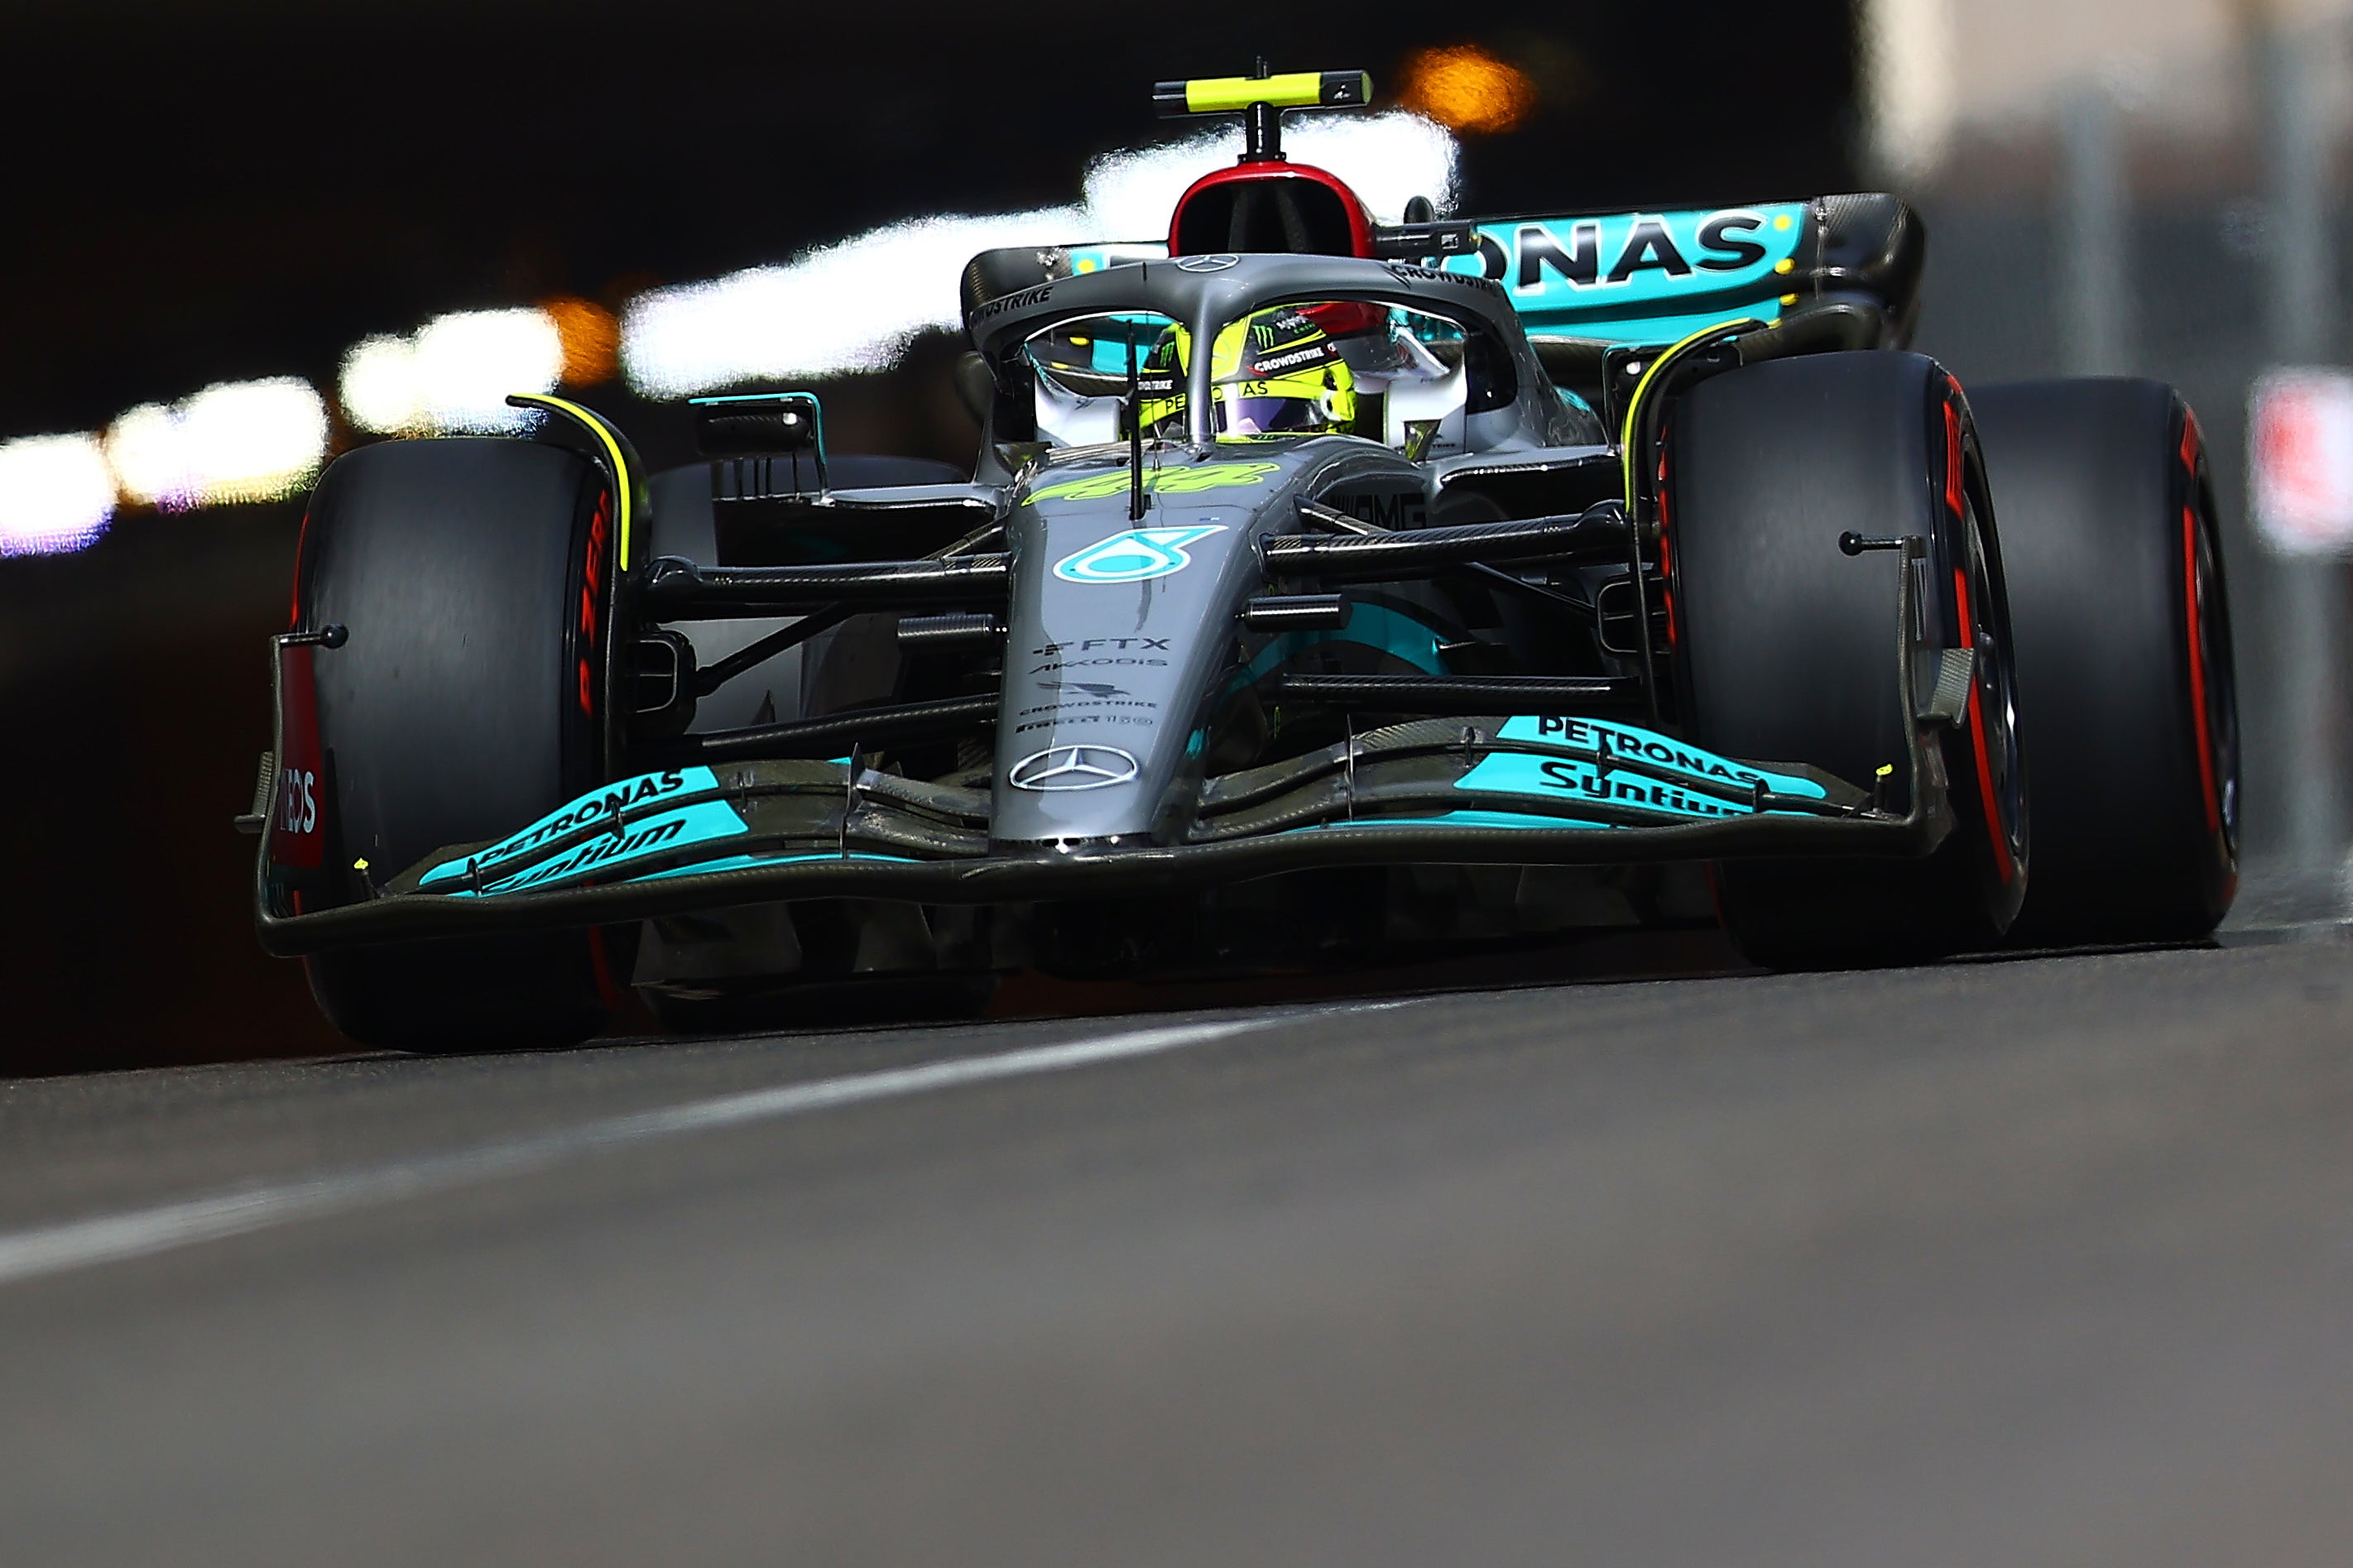 Lewis Hamilton has been struggling in the Mercedes this season